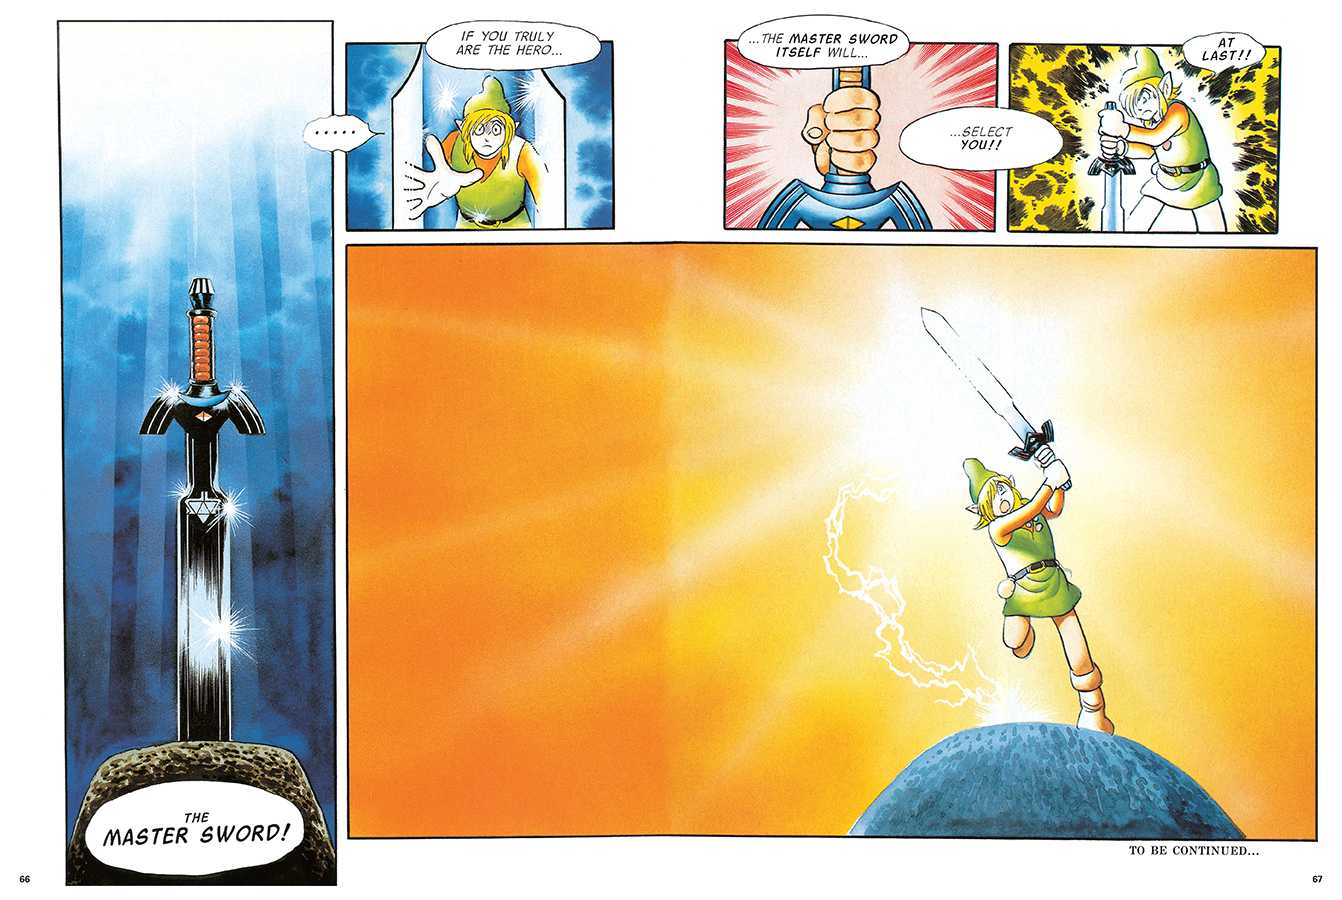 A Link To The Past Manga What To Expect In Viz Media's Legend Of Zelda: A Link To The Past Manga -  PopWrapped